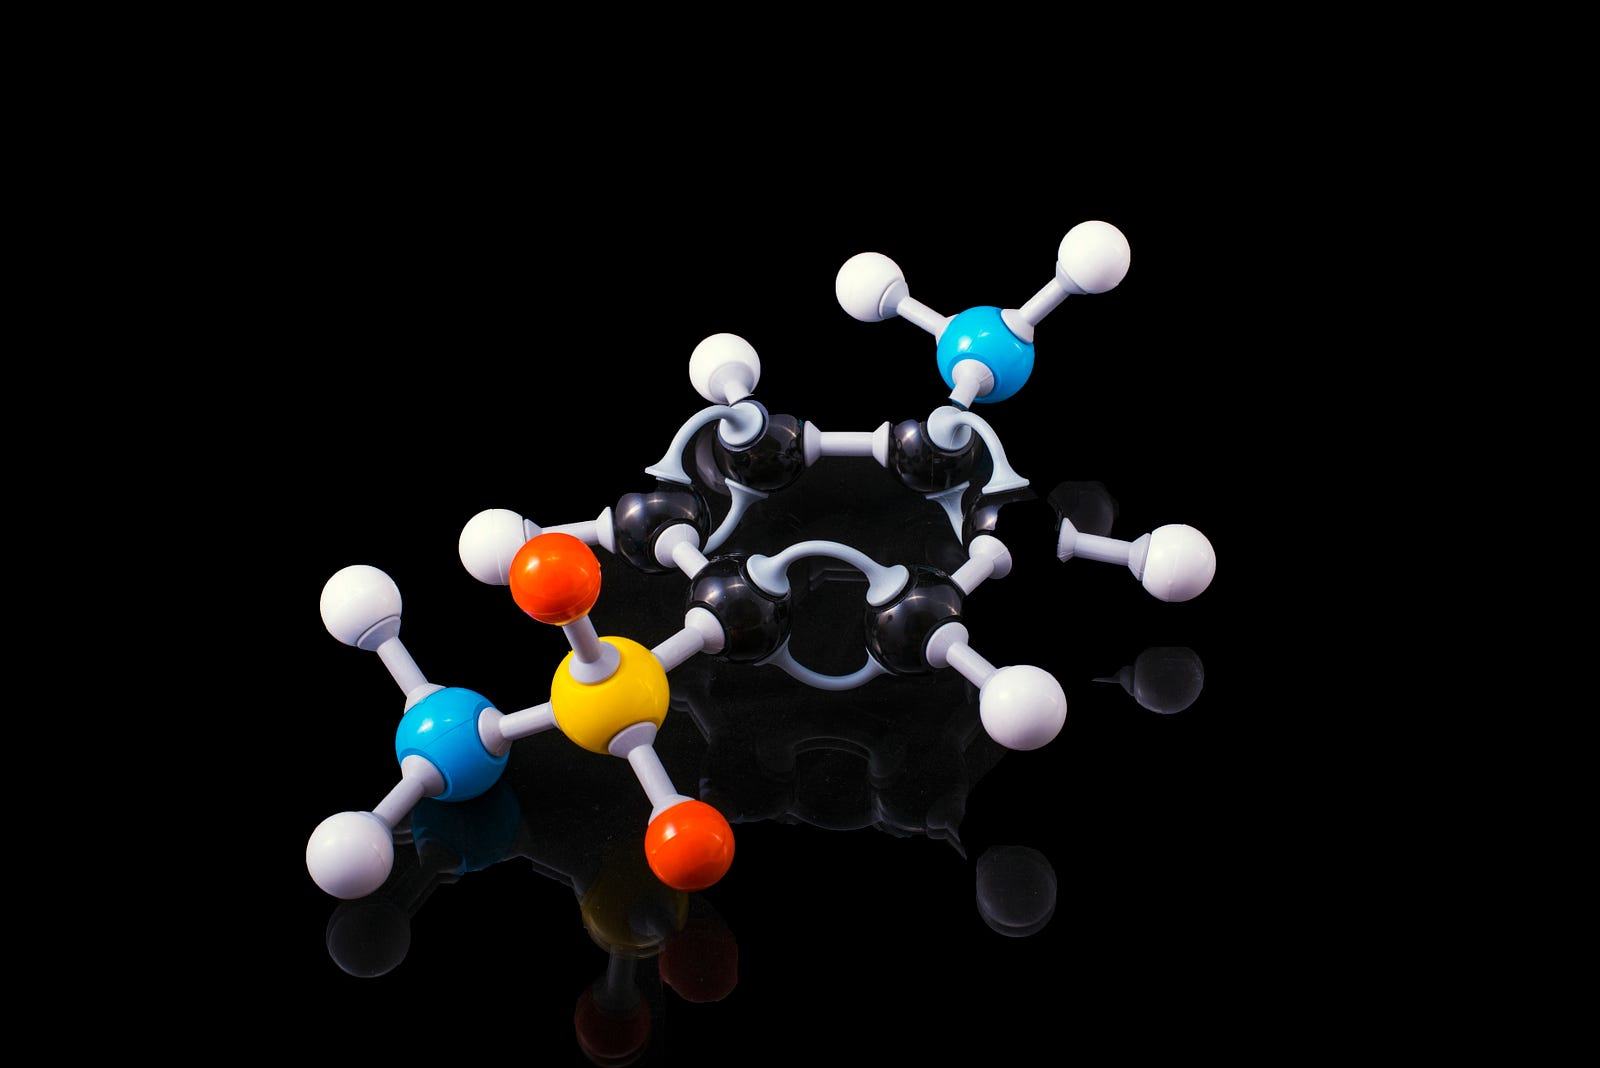 Plastic model of a molecule, multicolored against a black background. Chemogenetics inverts traditional drug discovery. Historically, scientists developed to target receptors inside cells. On the other hand, chemogenetic approaches determine a clinically approved drug first (based on bioavailability, pharmacokinetics, and tolerability).